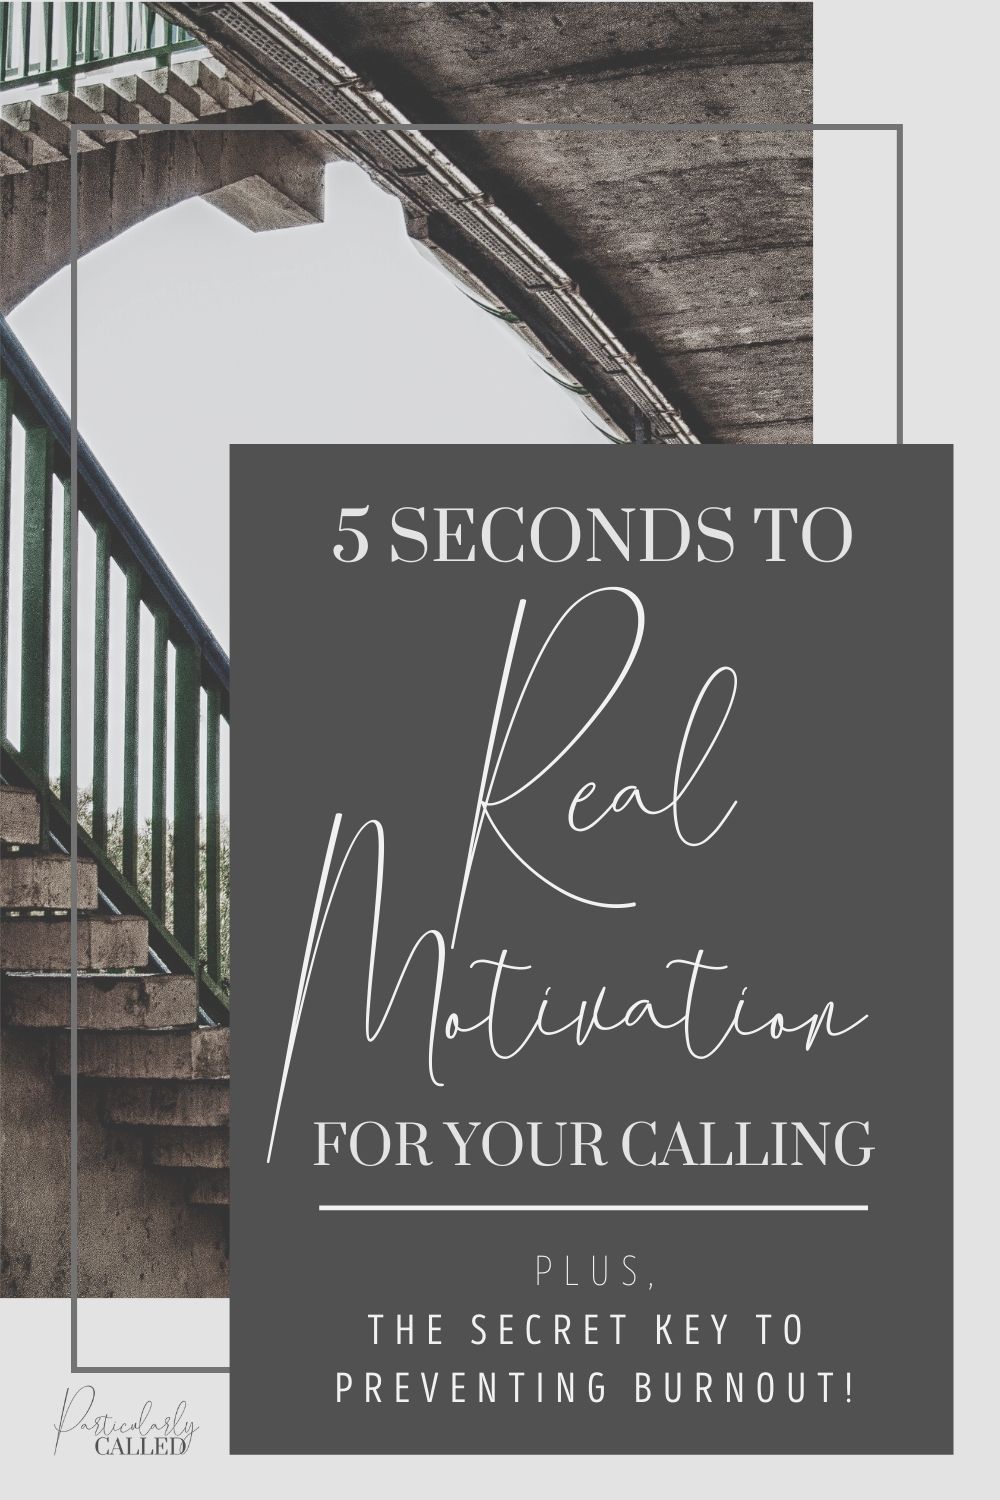 How to Get Motivated – The 5 Second Rule for Living your CALLING!